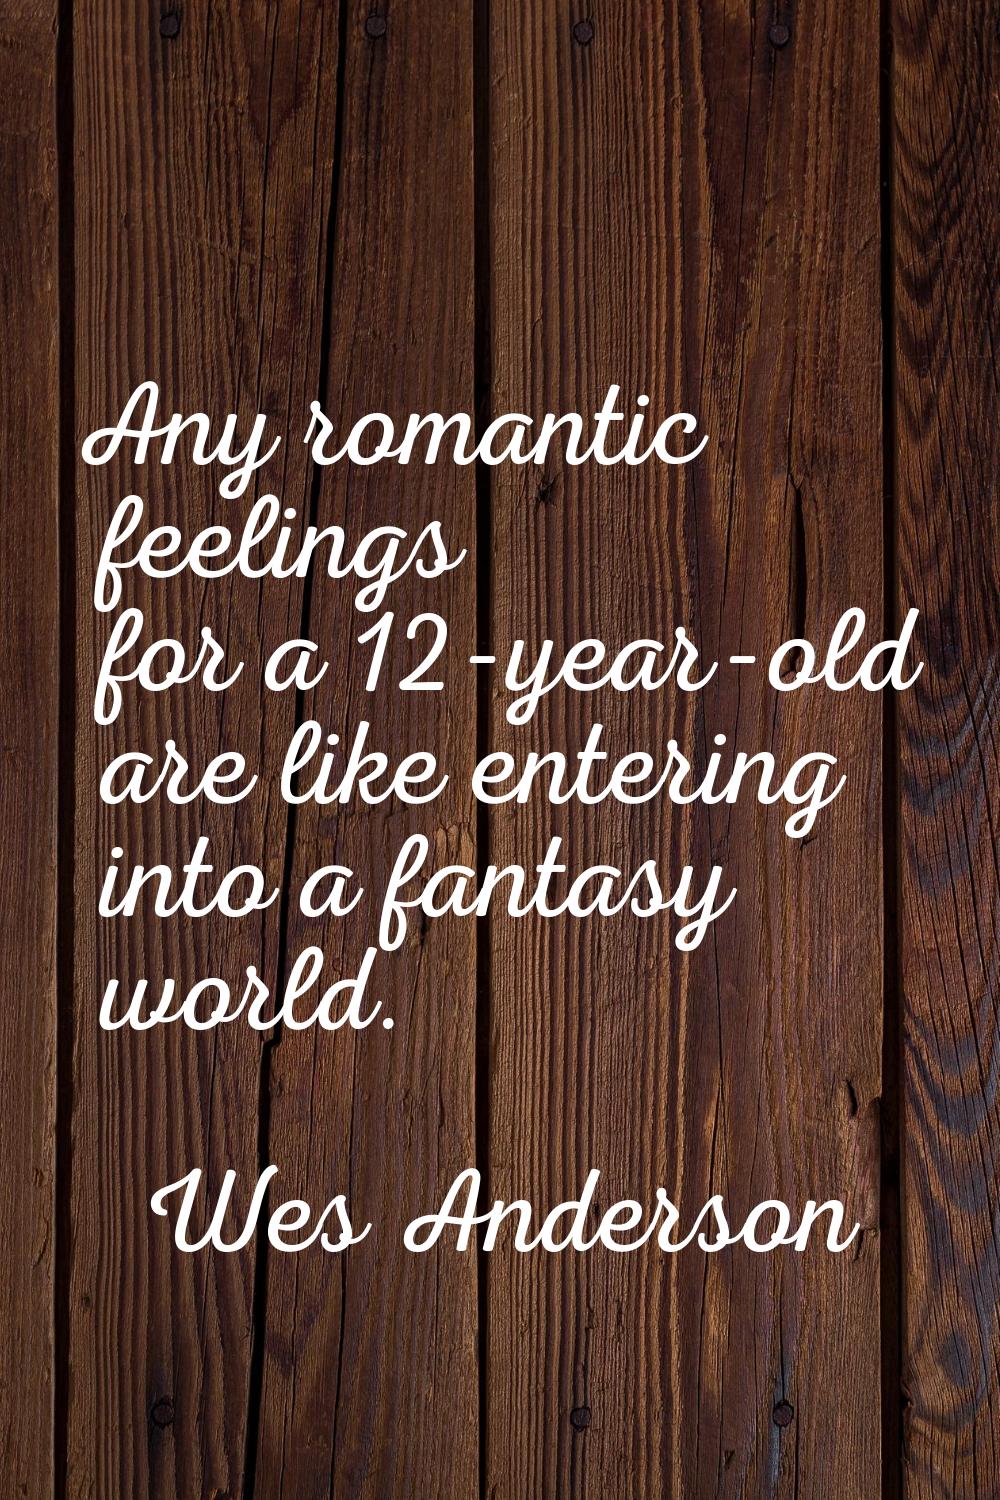 Any romantic feelings for a 12-year-old are like entering into a fantasy world.